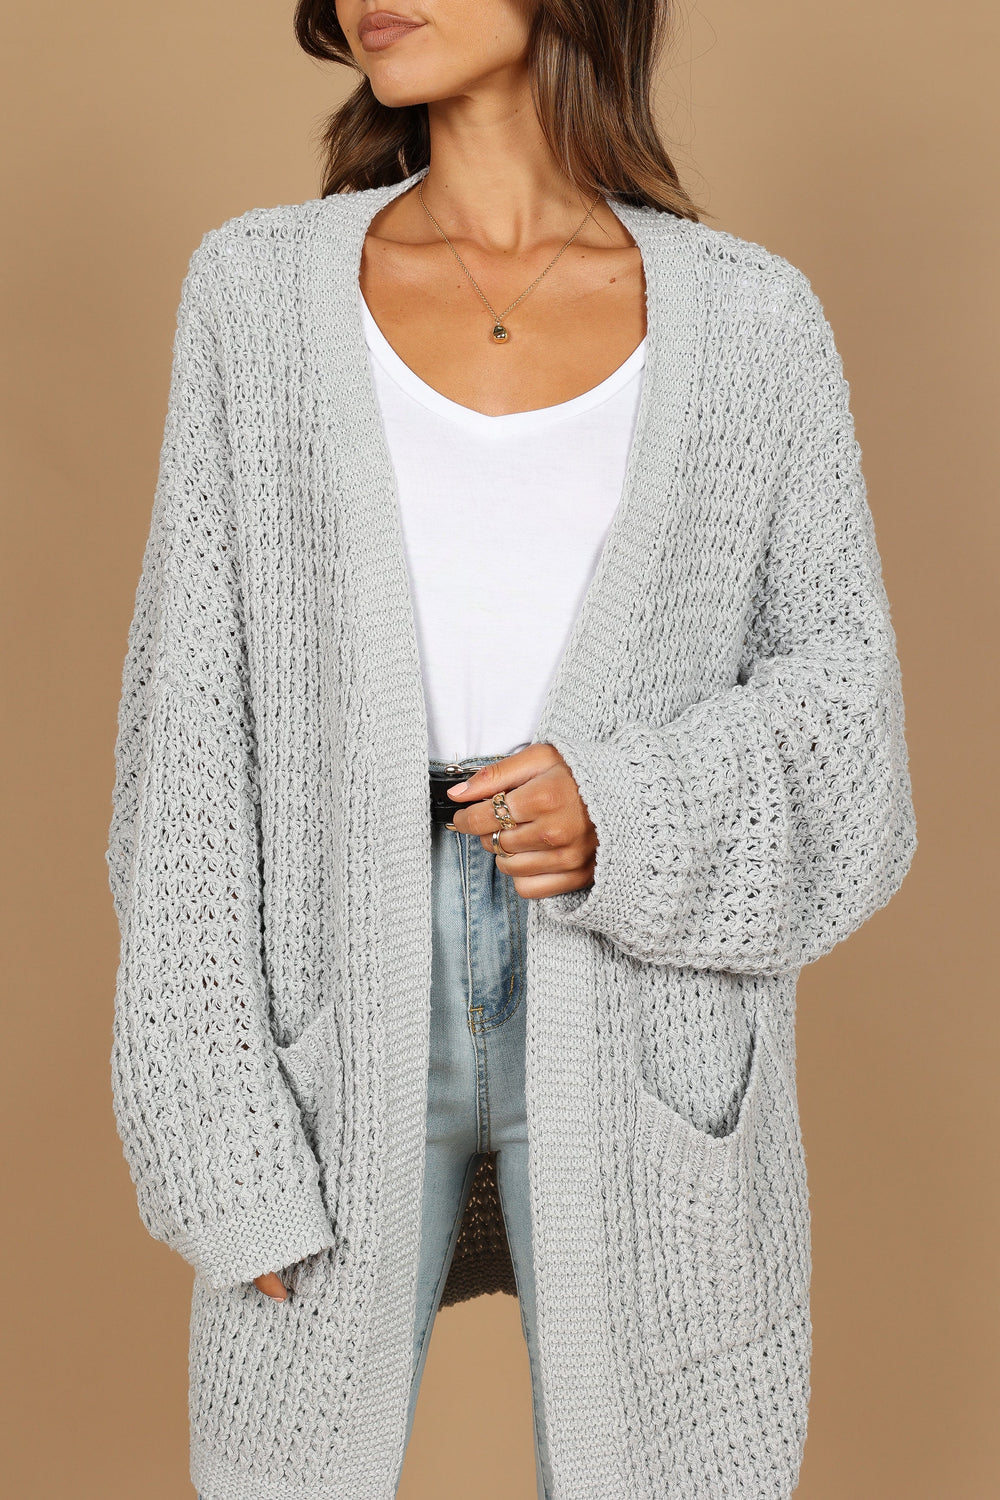 Petal and Pup USA OUTERWEAR Leyonie Cardigan - Grey